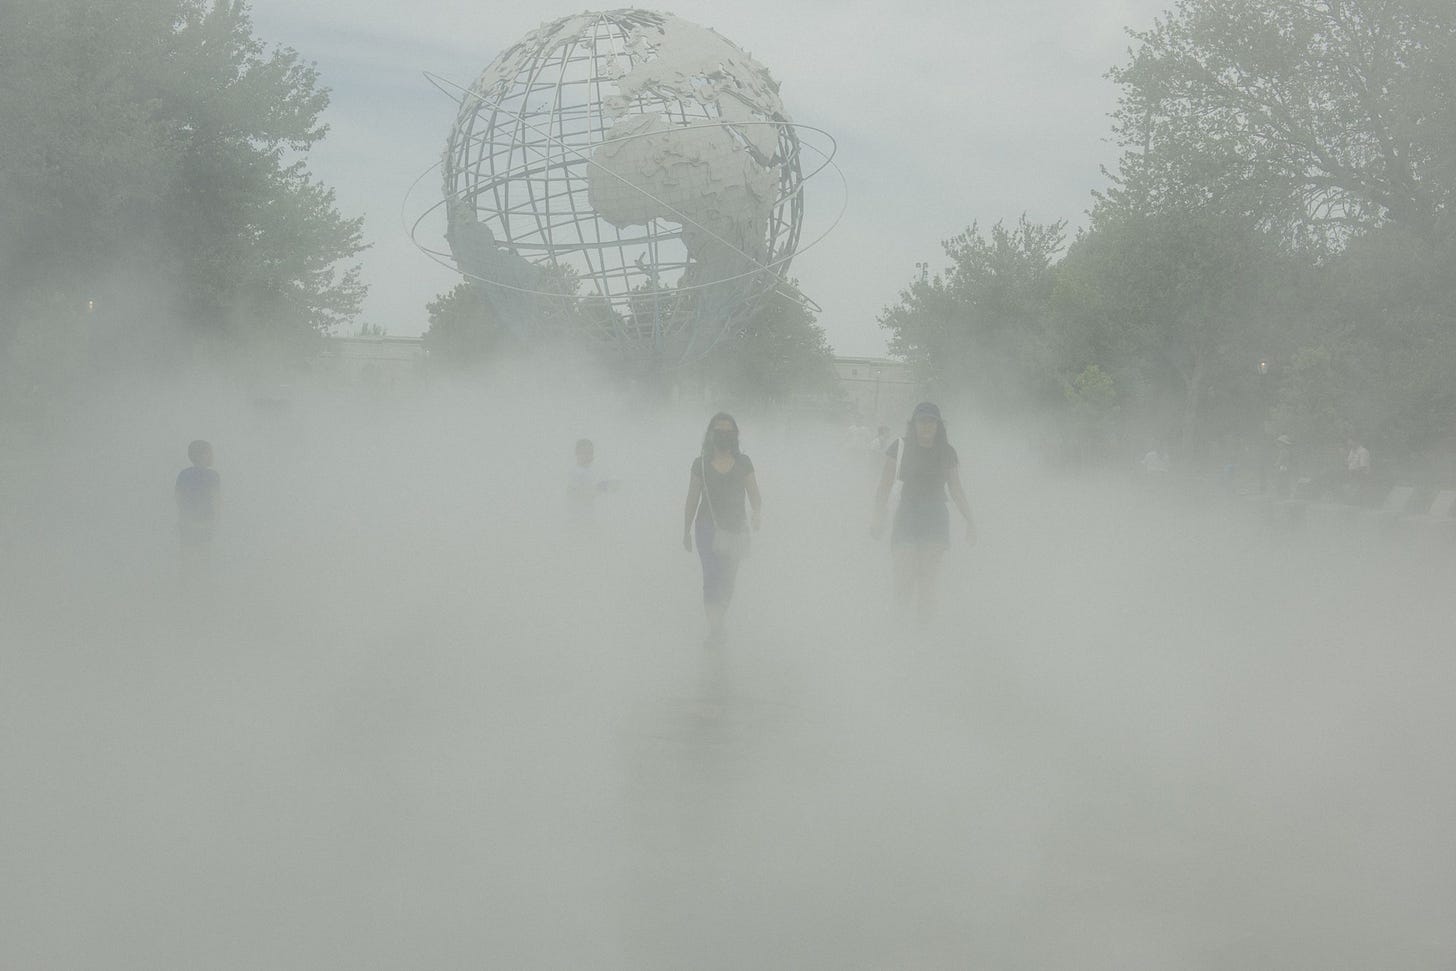 relates to In a Warming World, Consider the Mist Garden